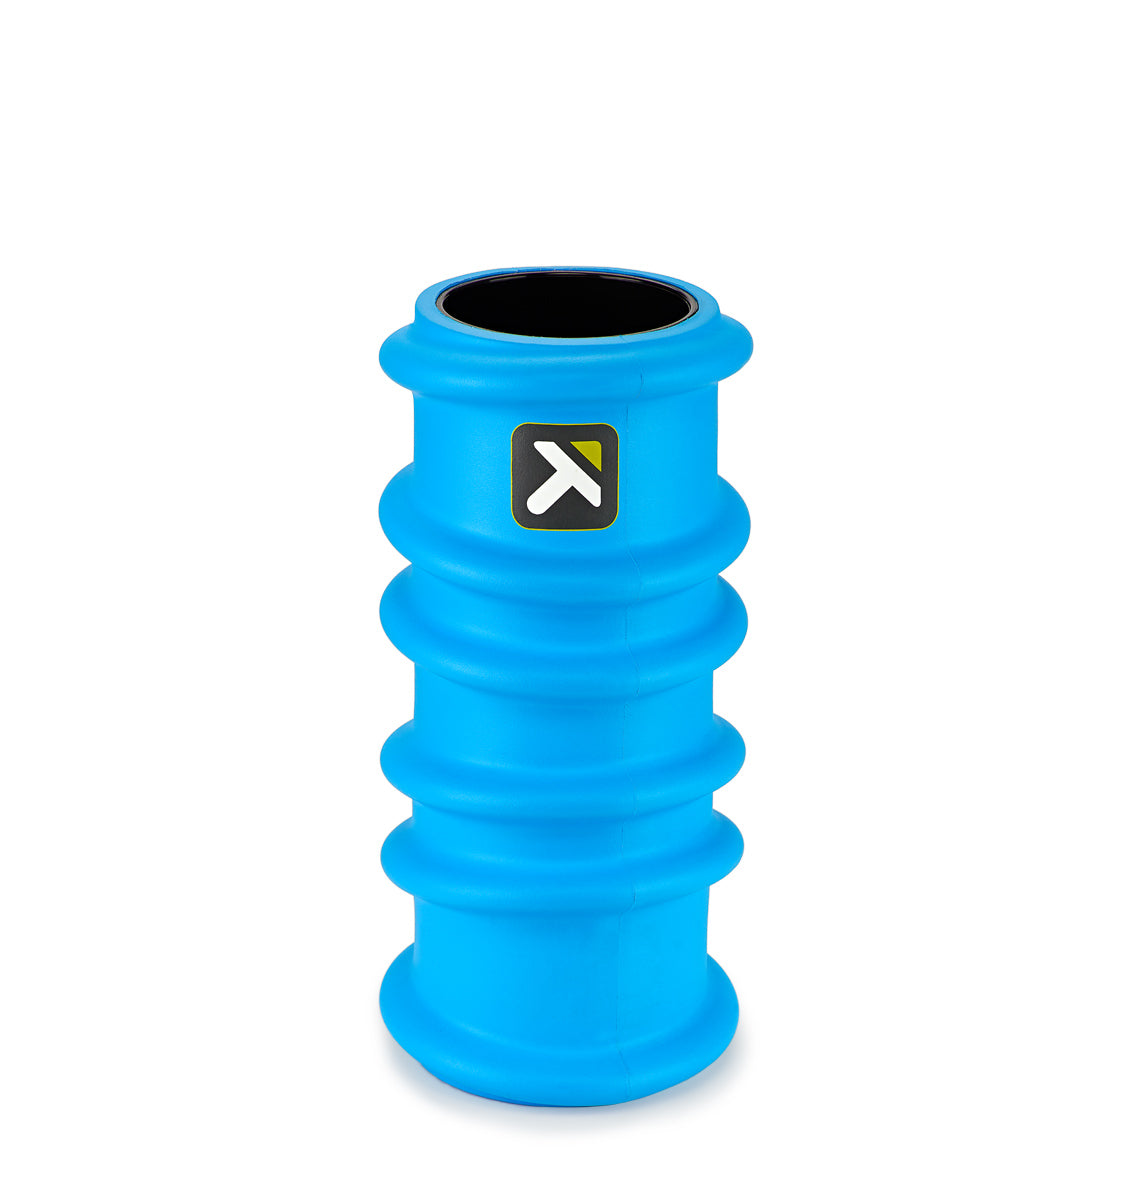 TriggerPoint Charge Foam Roller